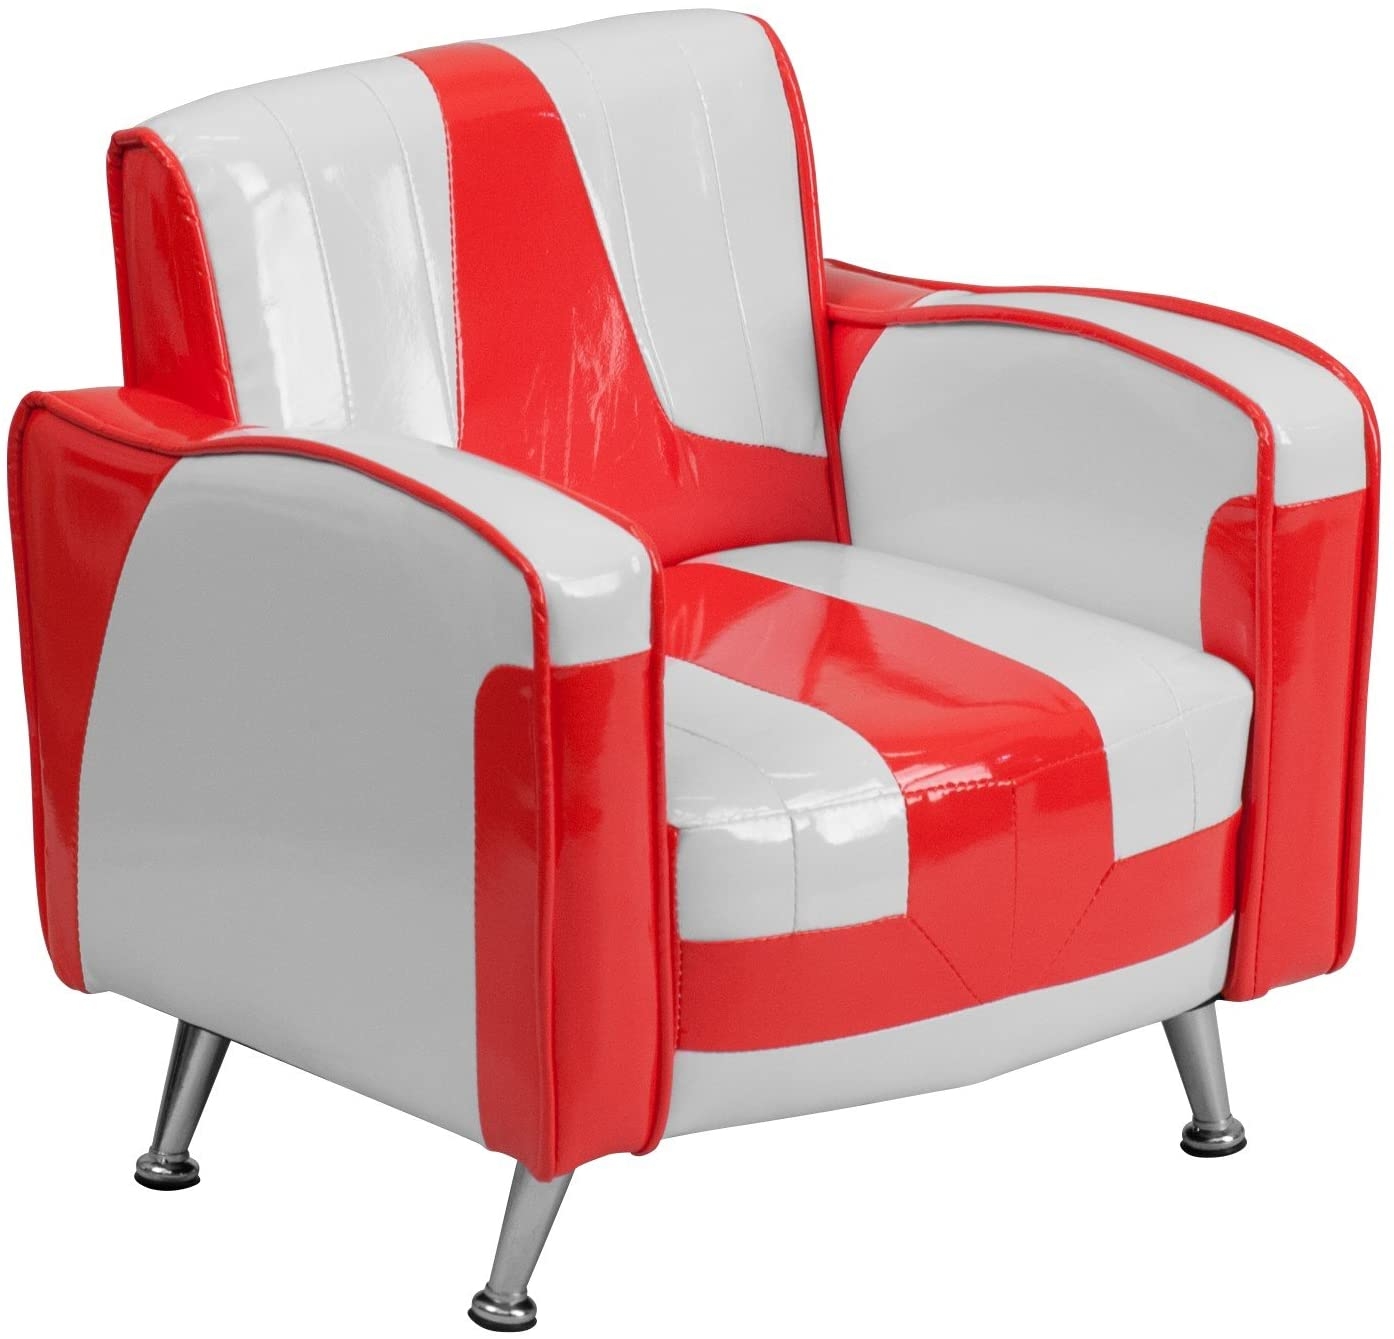 Flash Furniture HR-36-GG Kids Chair, Red and White